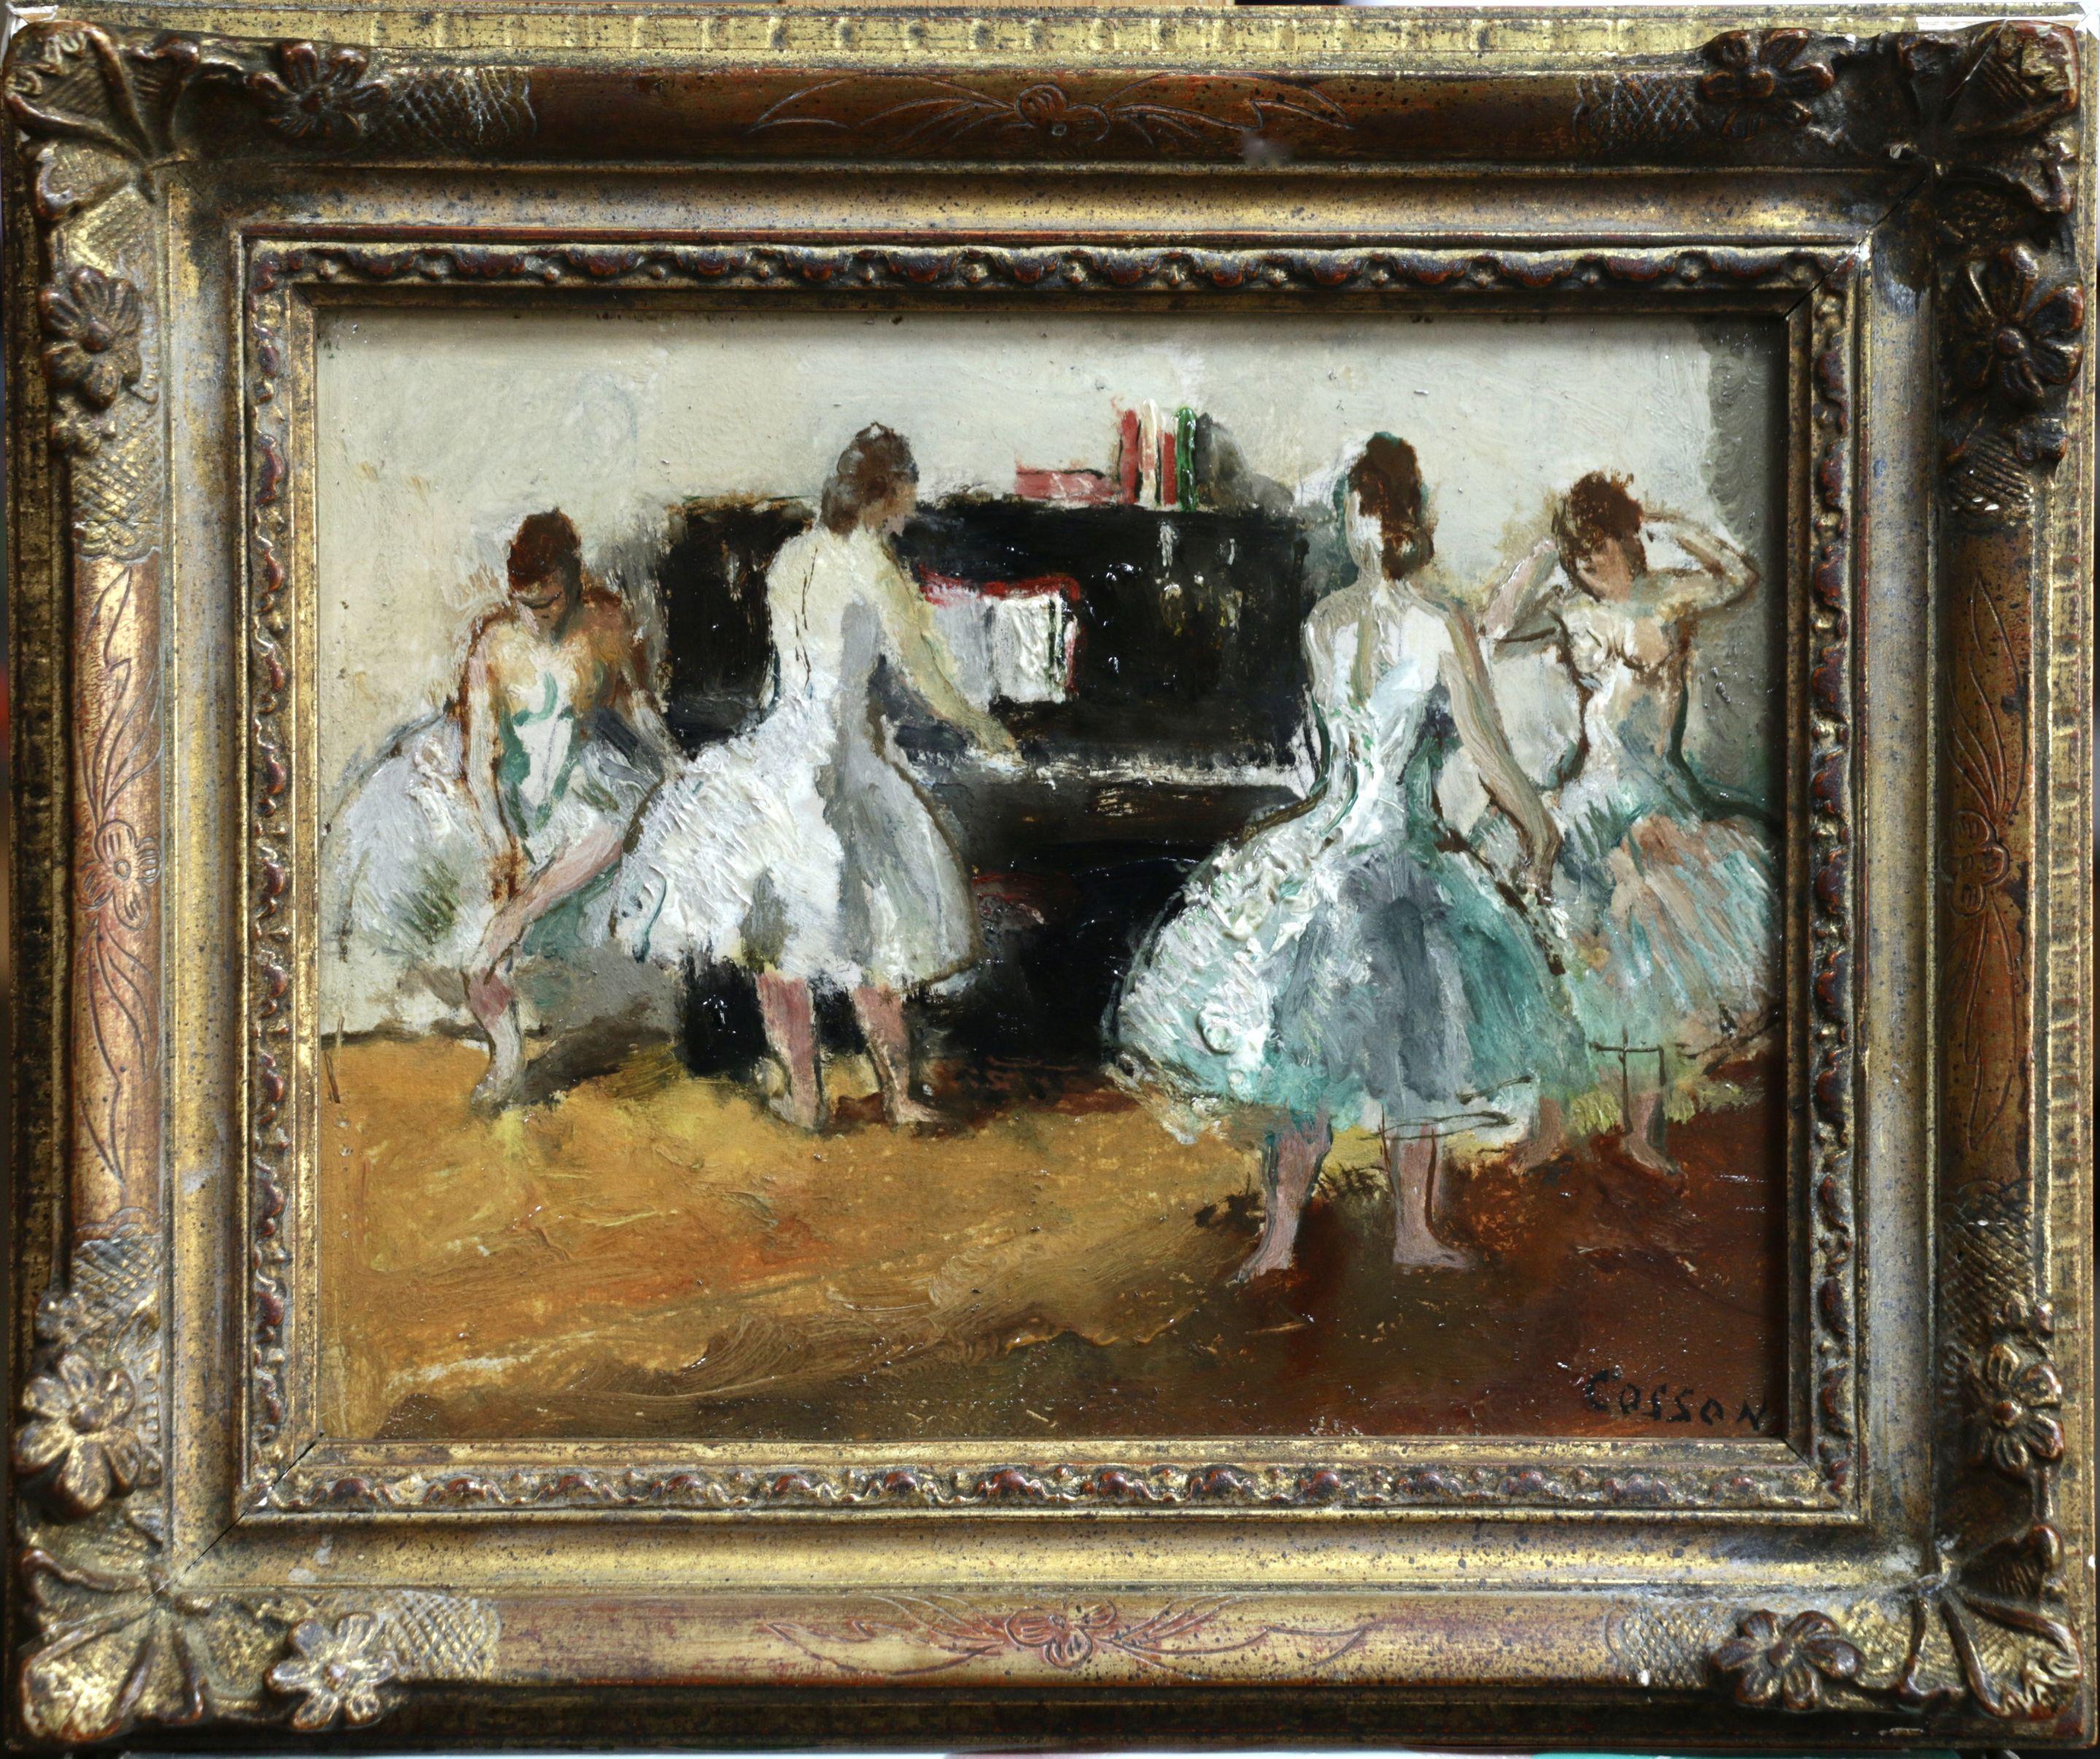 At the Piano - 20th Century Oil, Ballet Dancer Figures in Interior by Cosson - Painting by Jean-Louis-Marcel Cosson